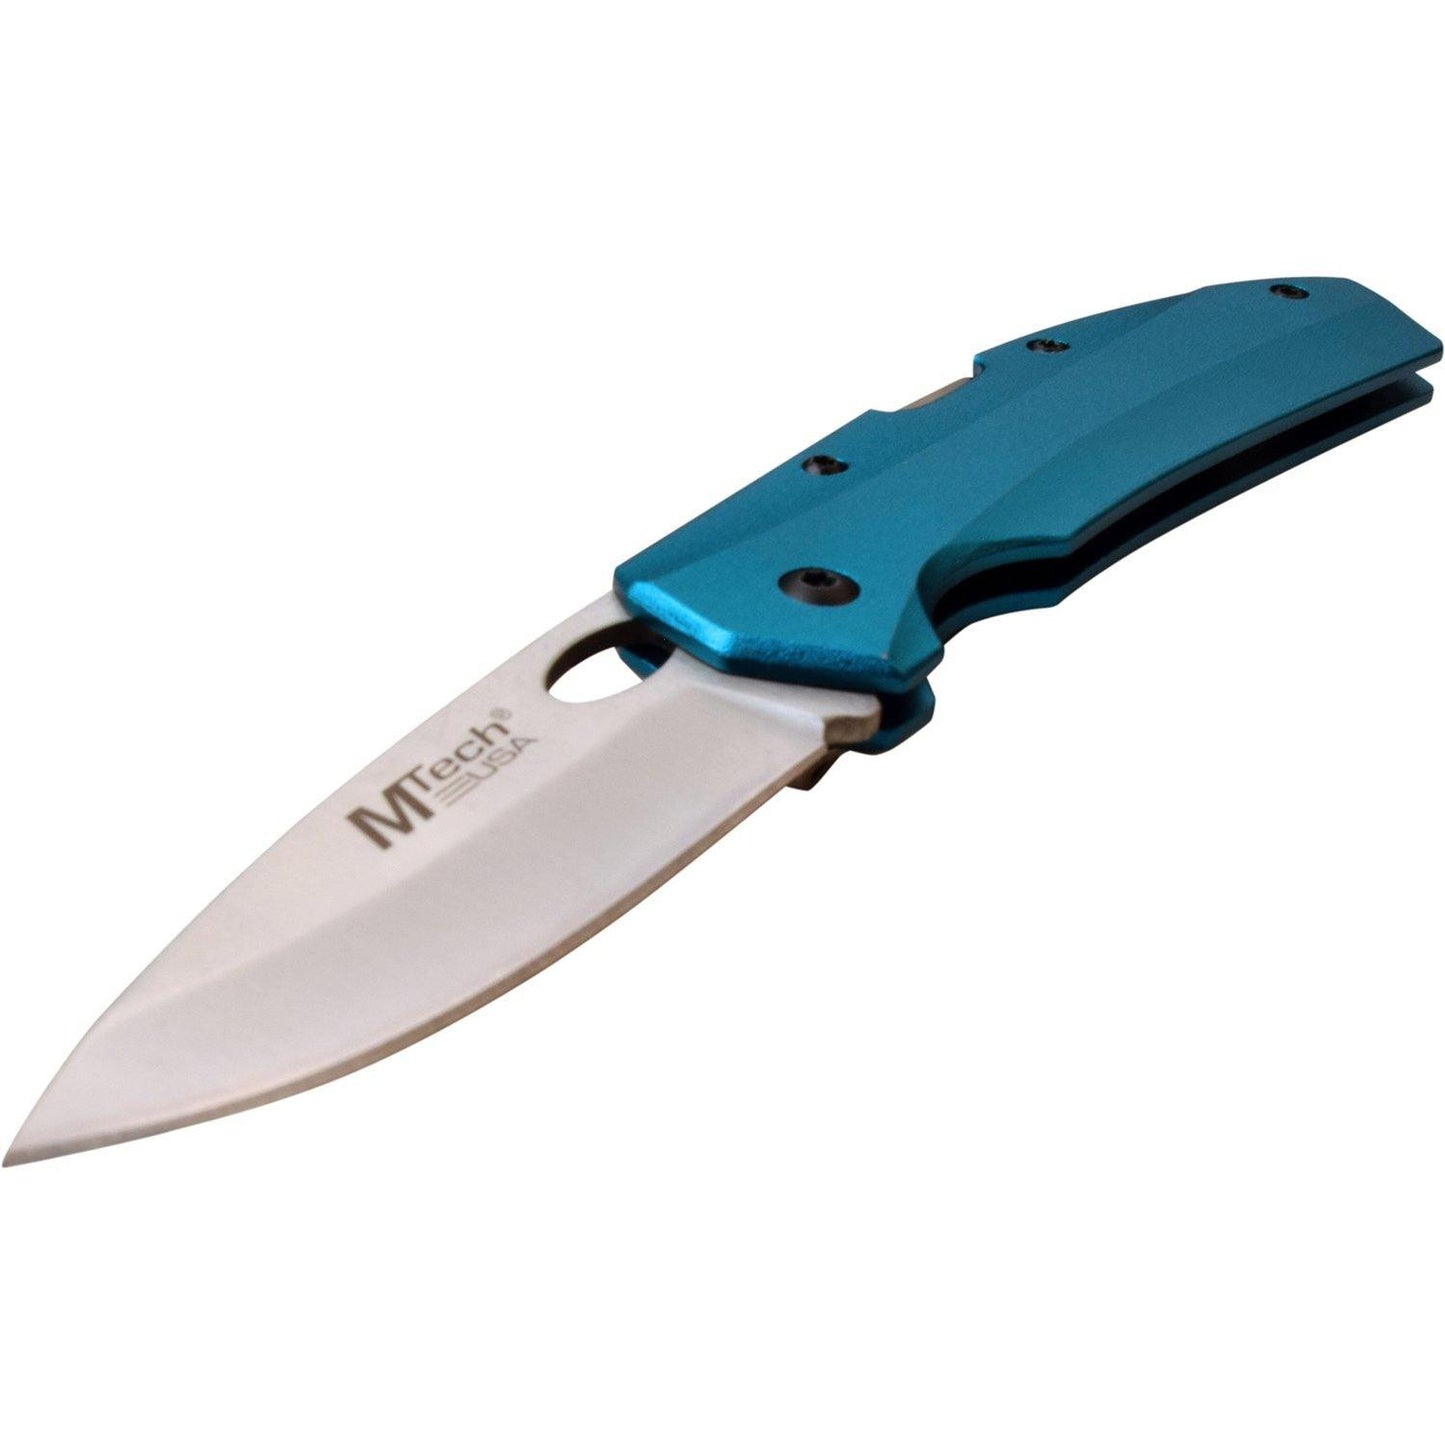 Mtech Drop Point Fine Edge Blade Folding Knife - 7 Inches Overall Blue #mt-1076Bl - Xhunter New Zealand